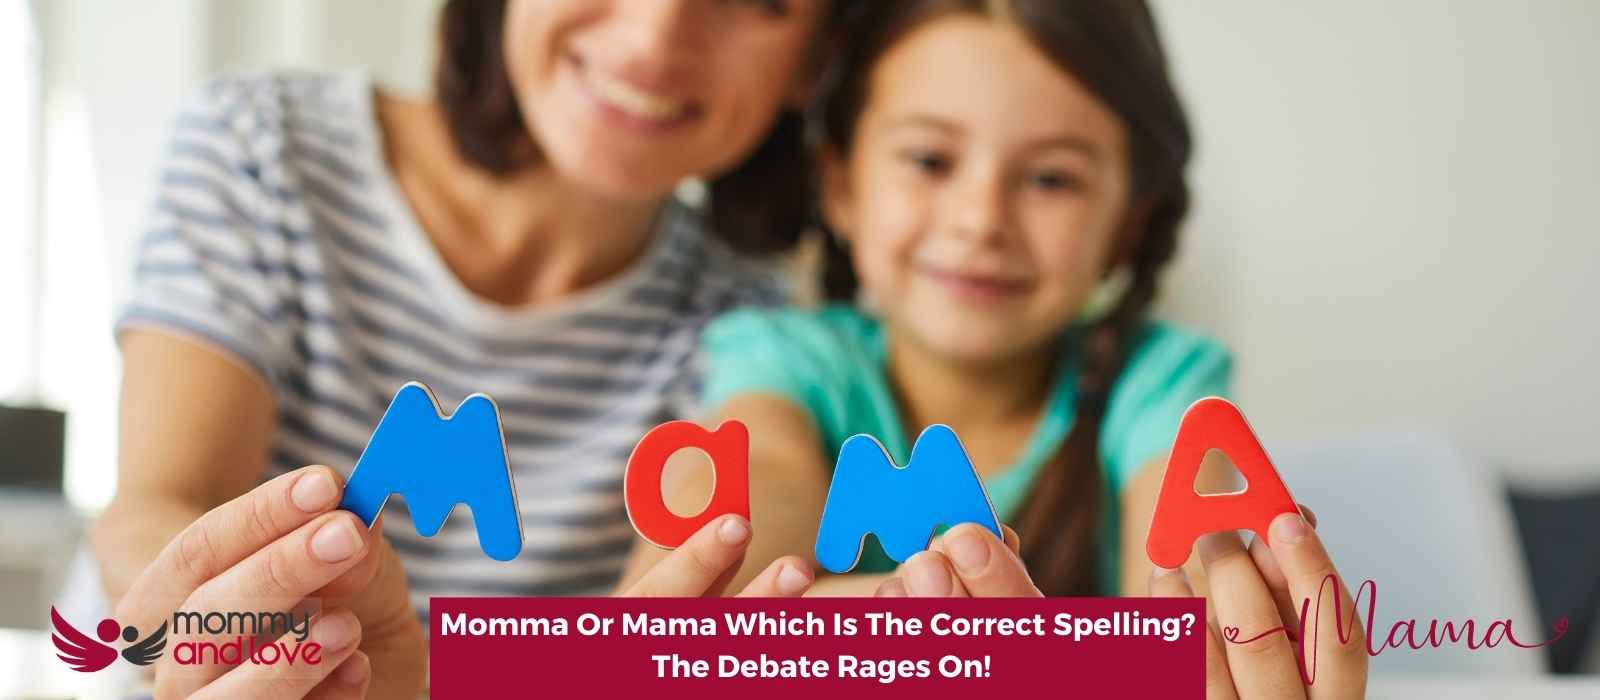 Momma Or Mama Which Is The Correct Spelling? The Debate Rages On!